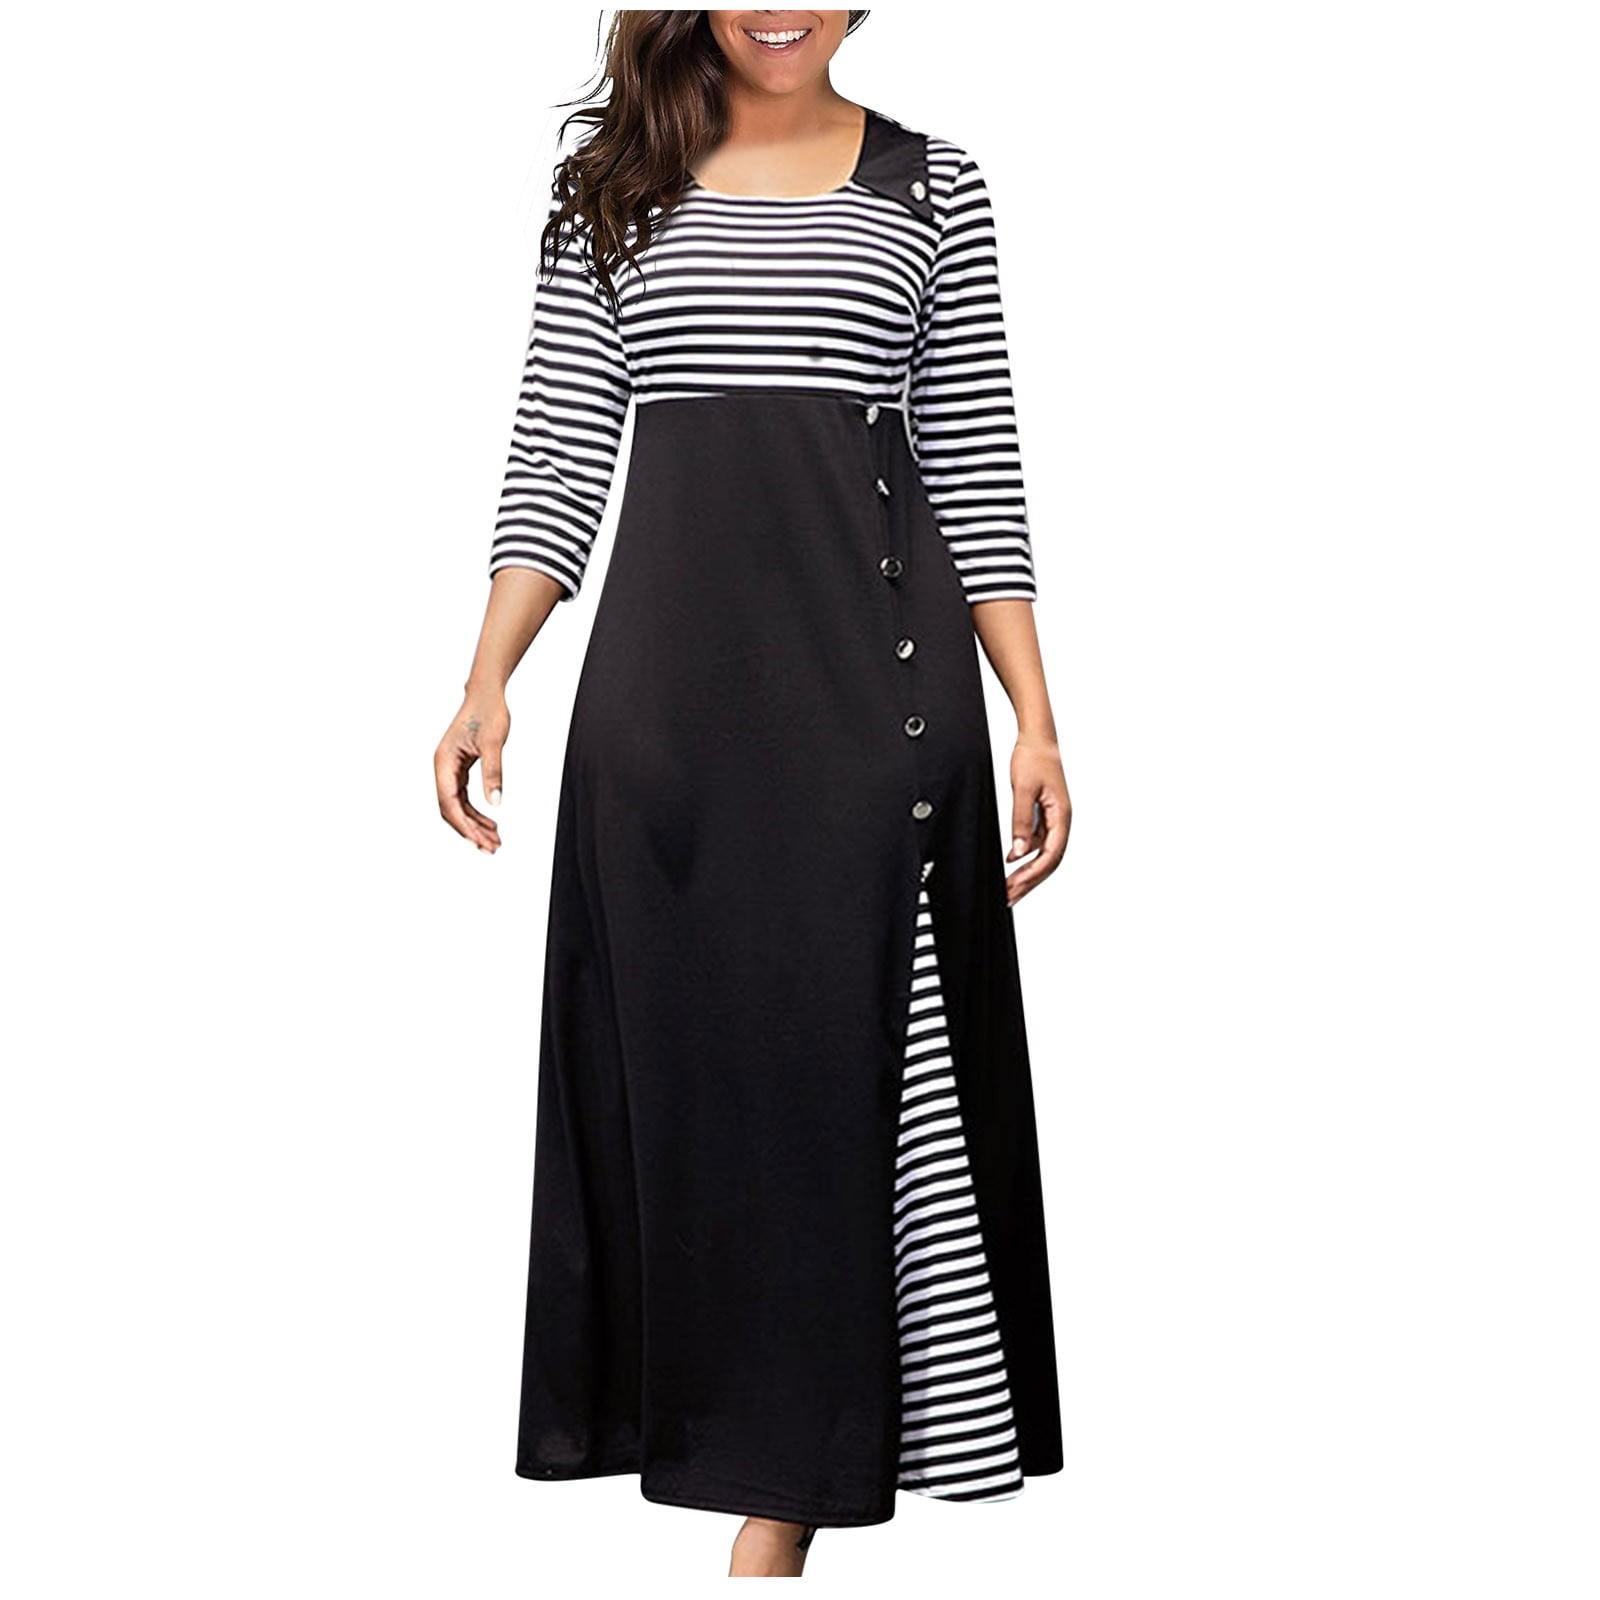 Huaai Dress for Women Casual Round Neck Contrast Striped Front Button ...